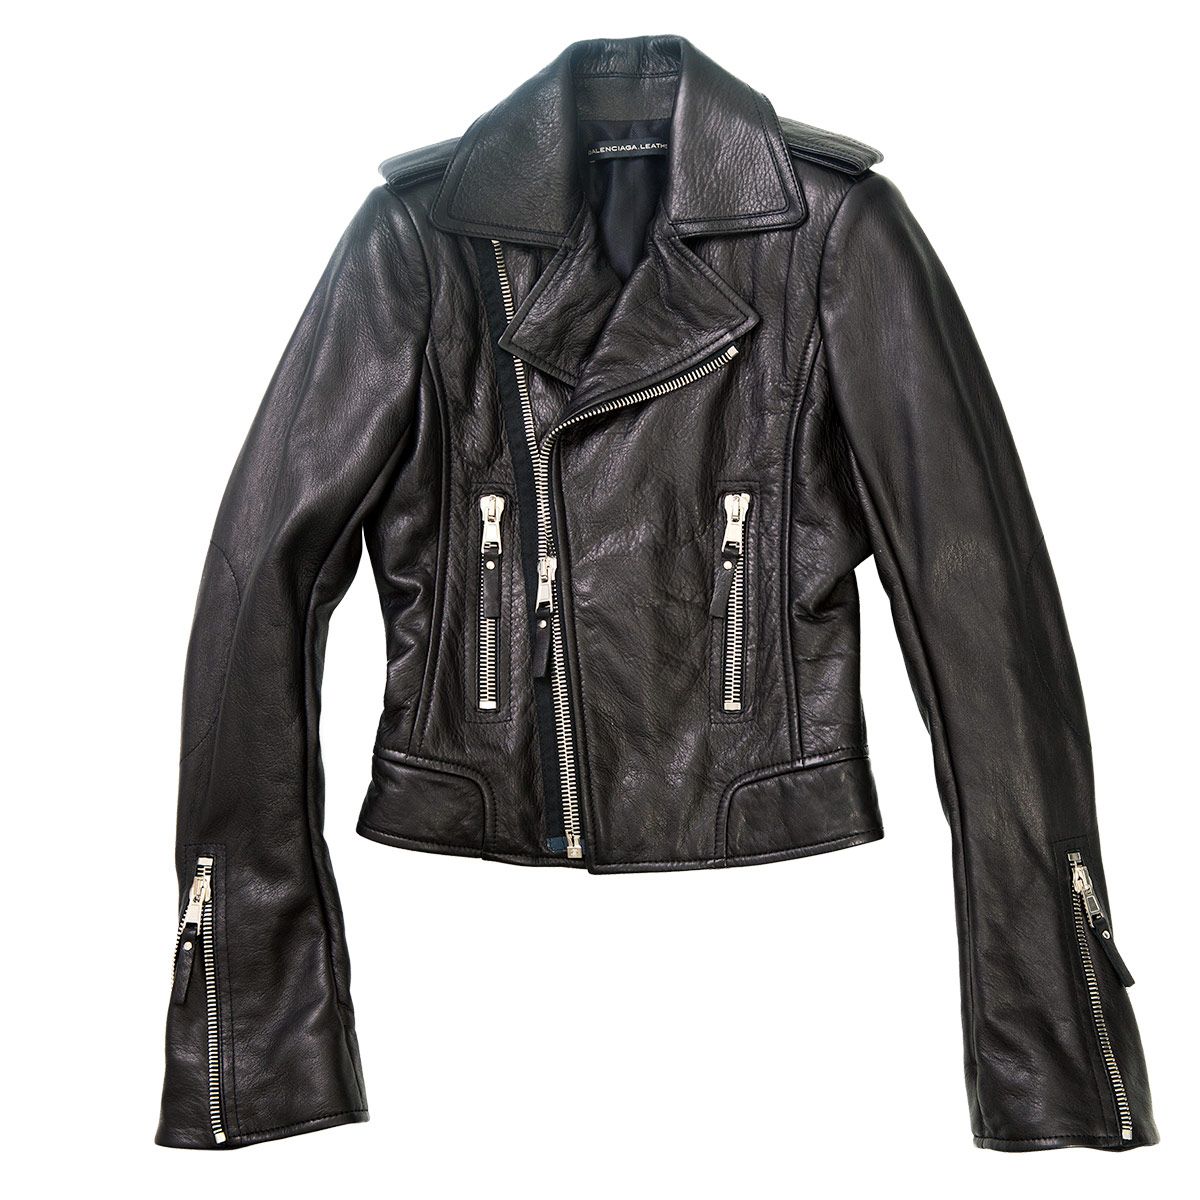 In Perfect Motorcycle Jacket